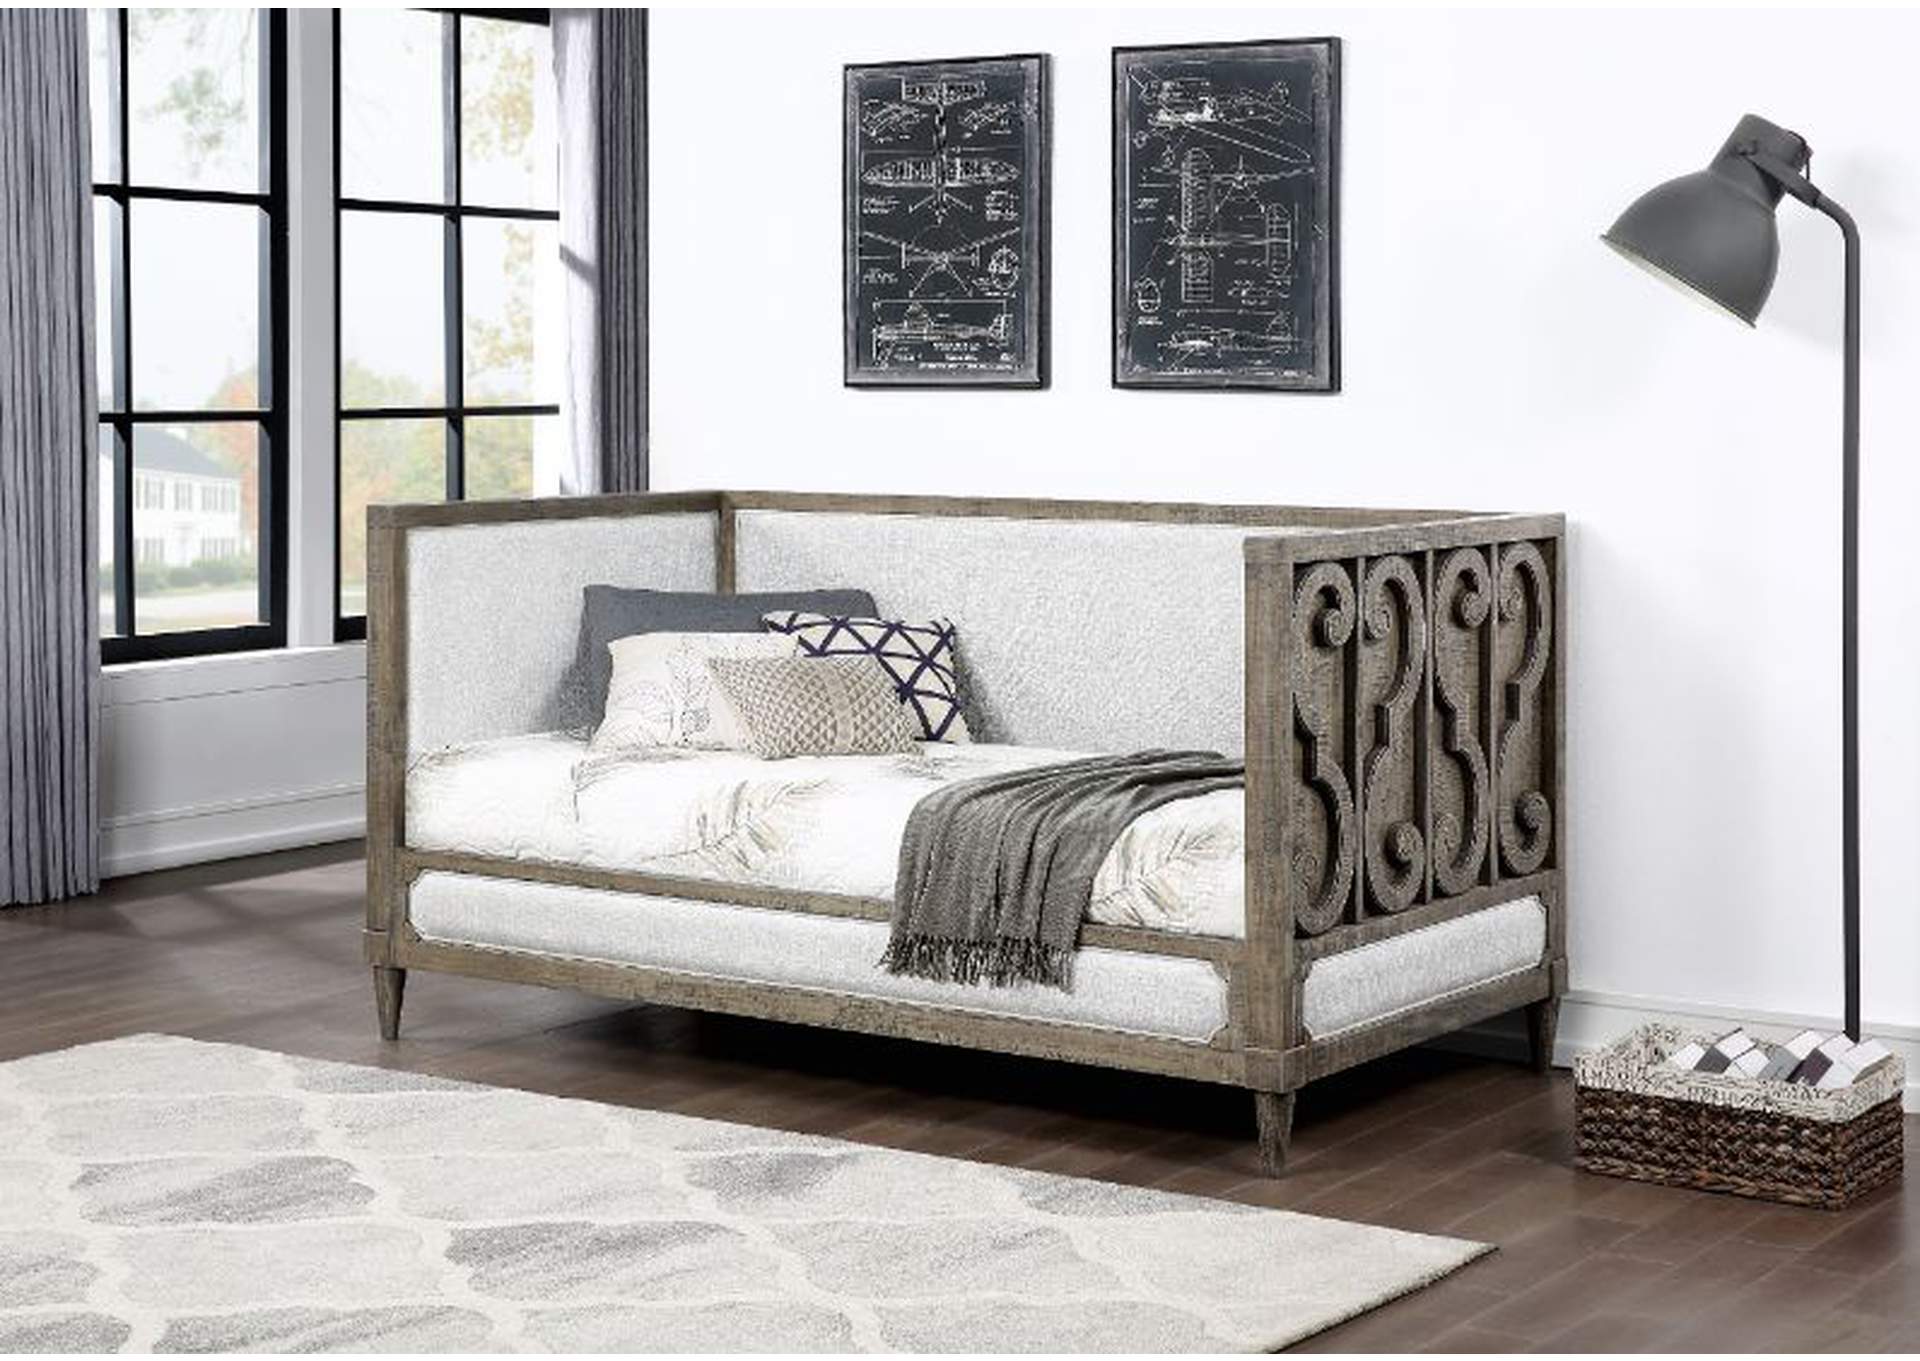 Artesia Daybed,Acme